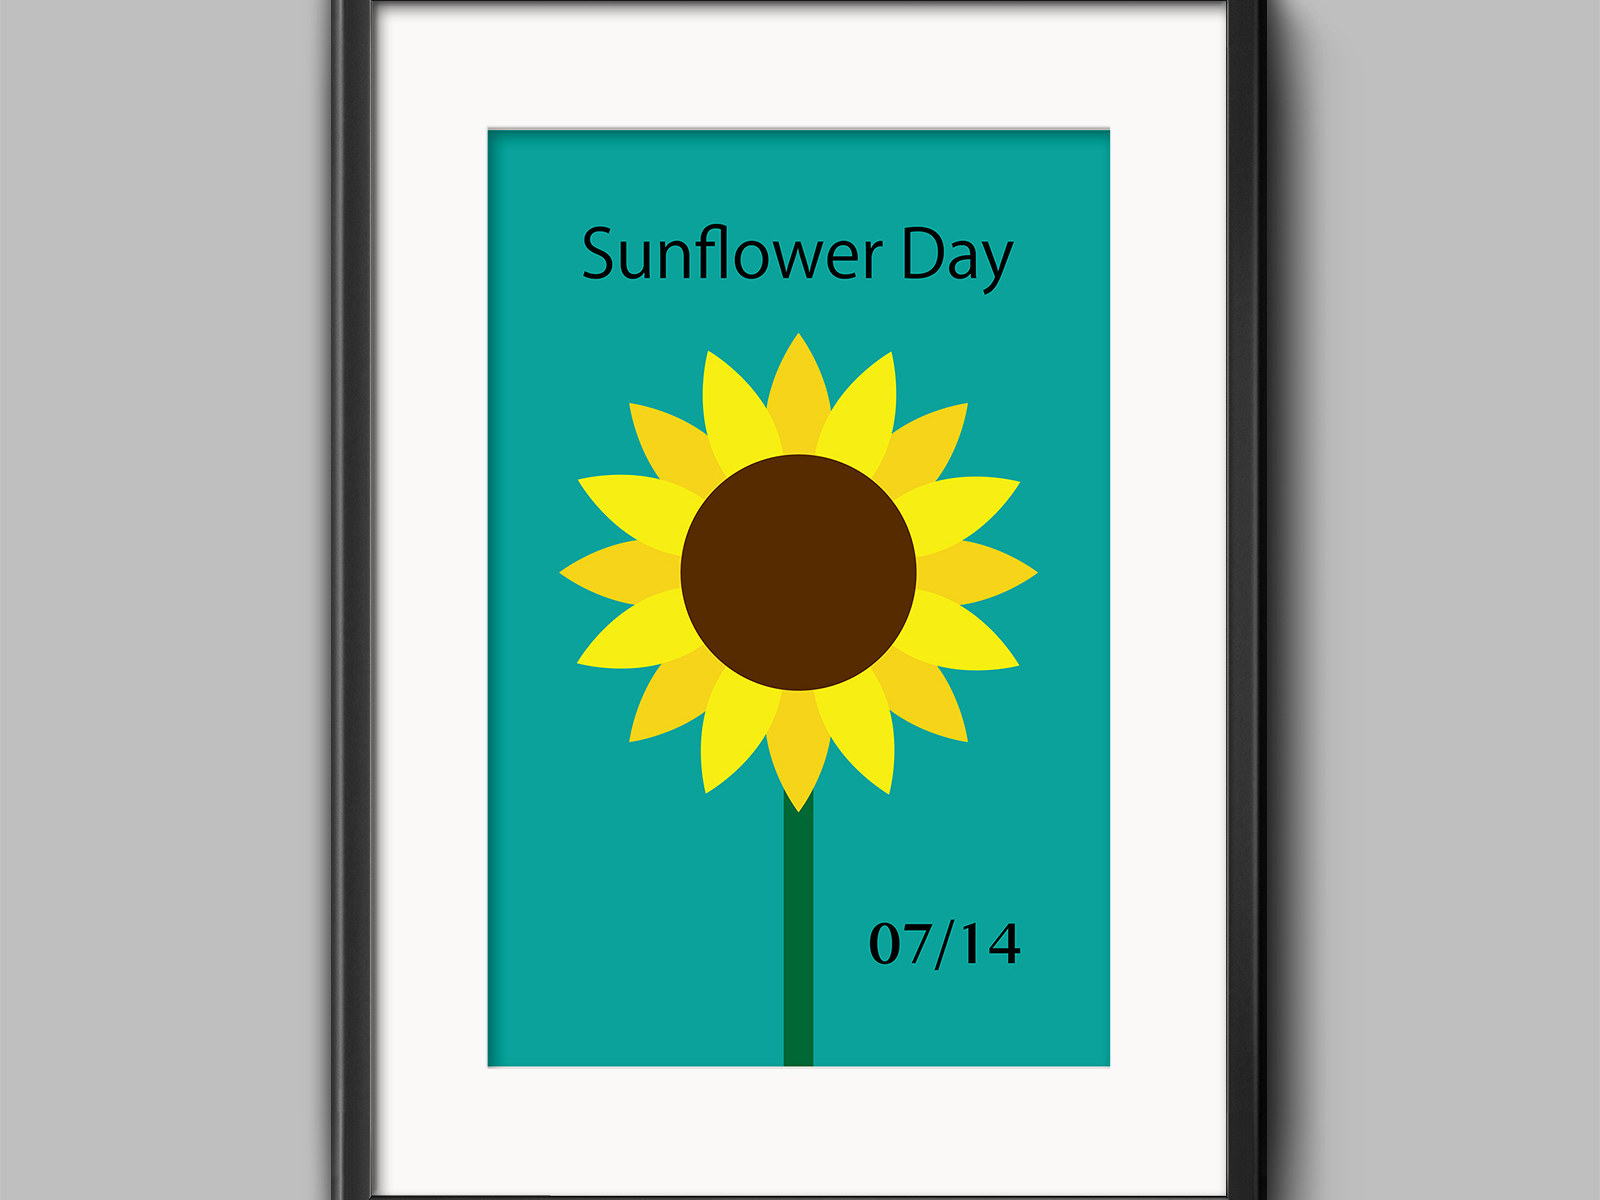 Daily Design 07/14 Sunflower Day by Youki on Dribbble